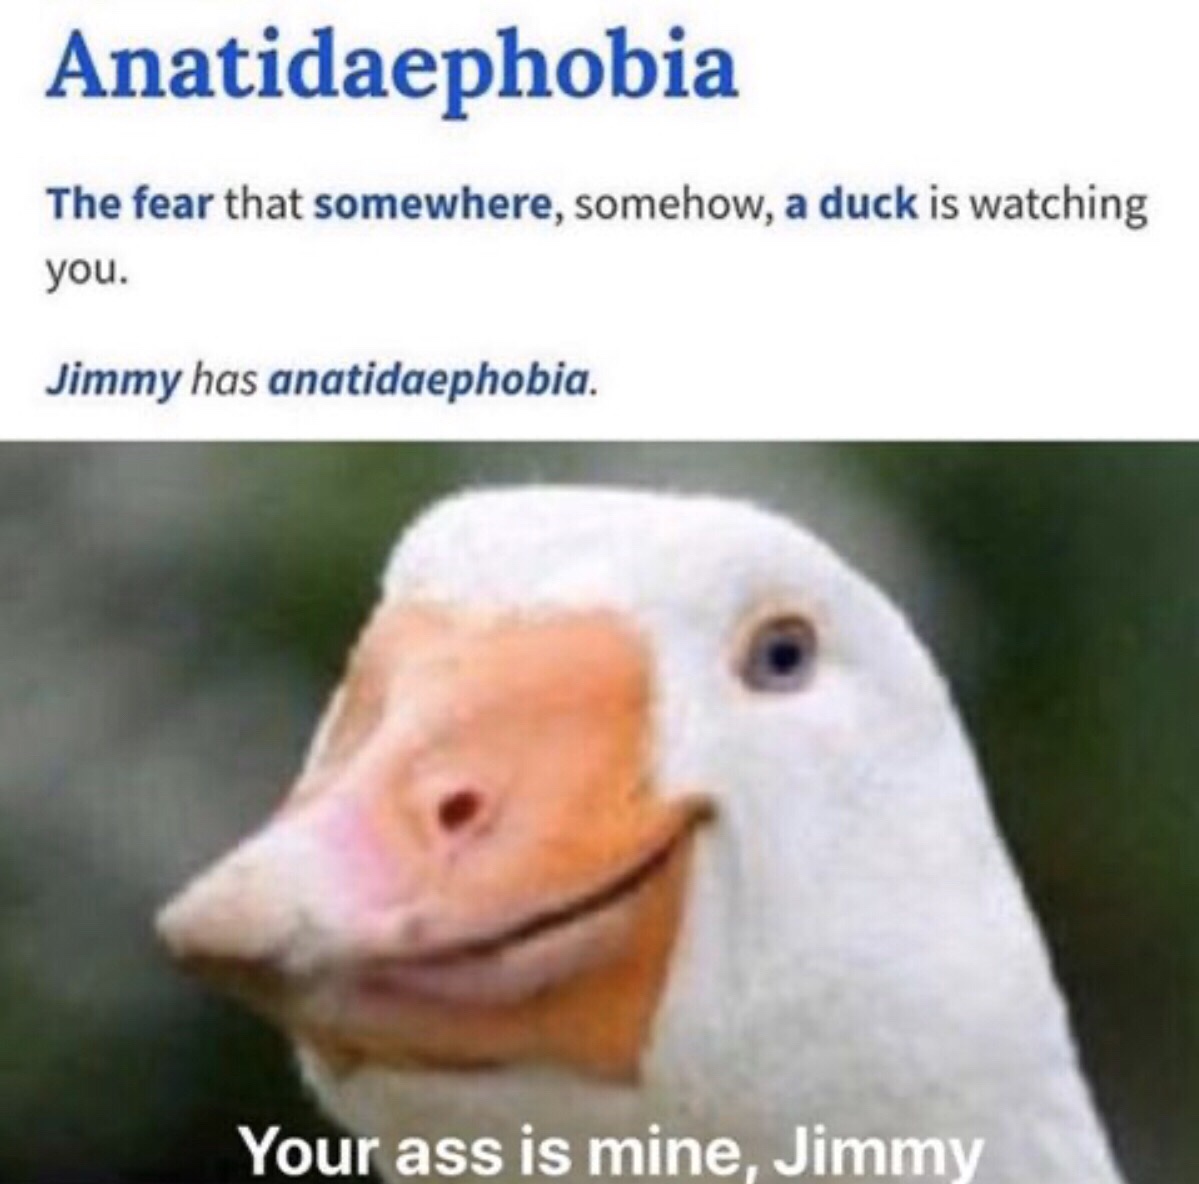 beak - Anatidaephobia The fear that somewhere, somehow, a duck is watching you. Jimmy has anatidaephobia. Your ass is mine, Jimmy